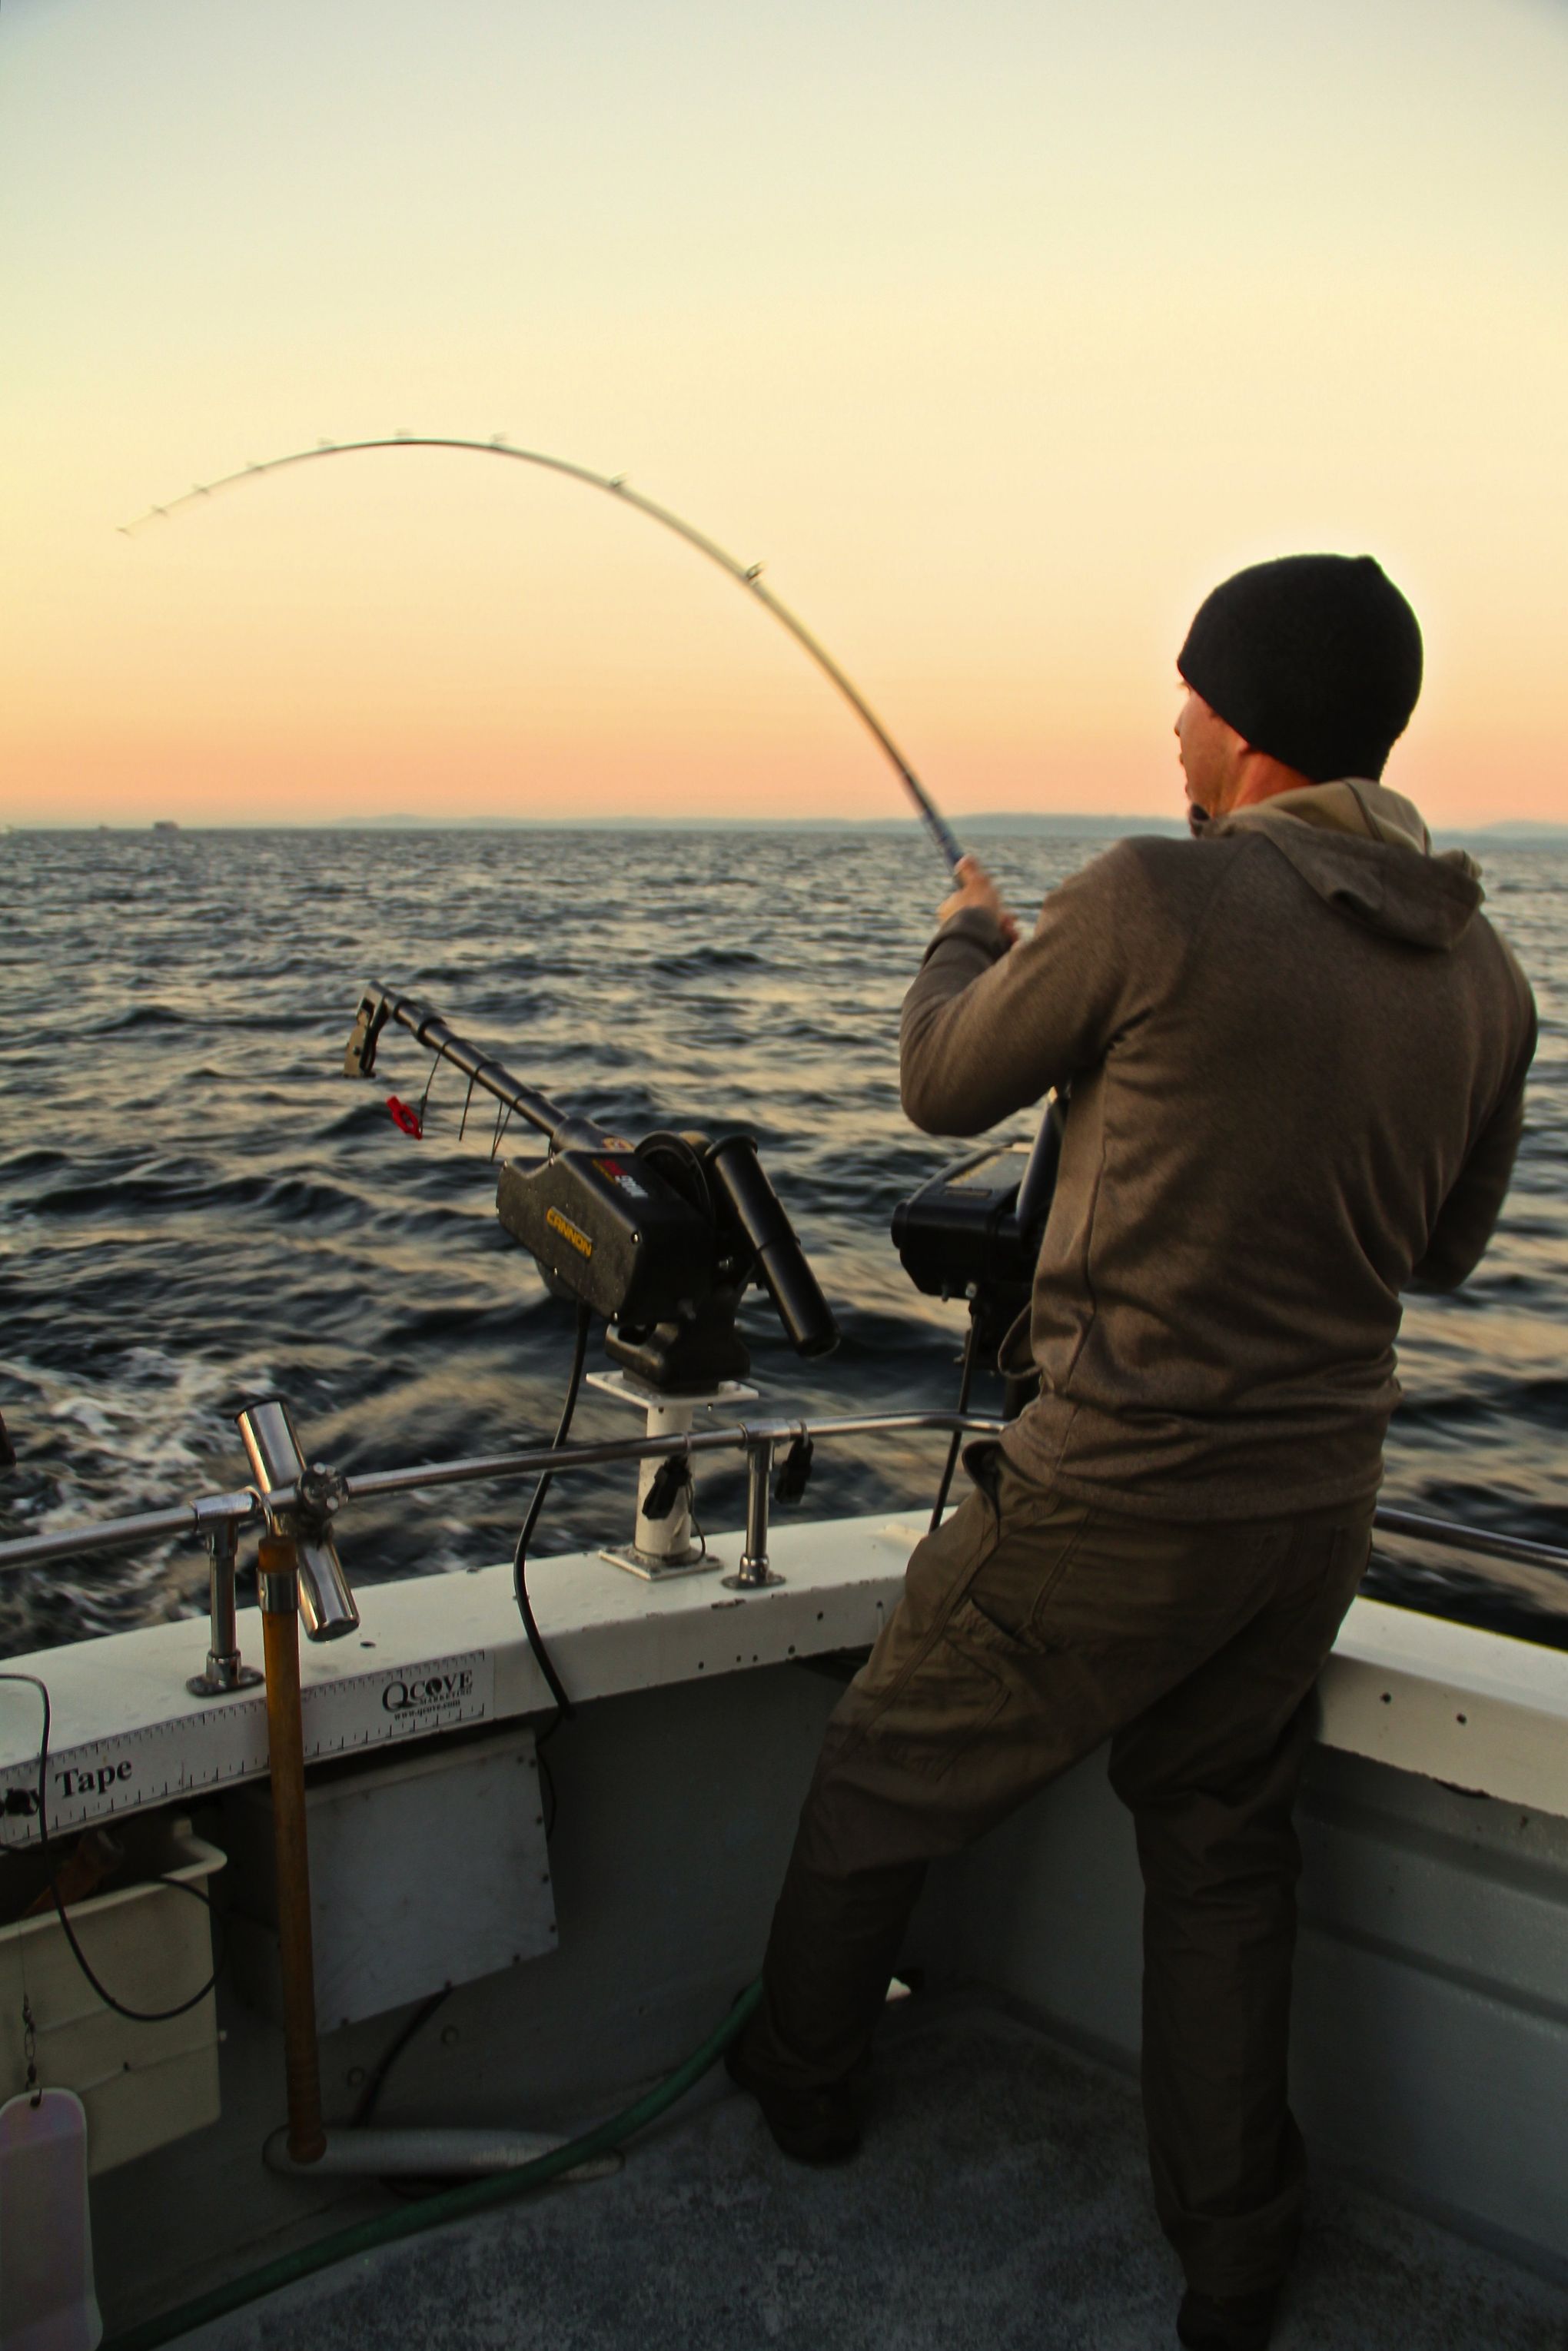 Want to try salmon fishing? Here's how to get started this fall